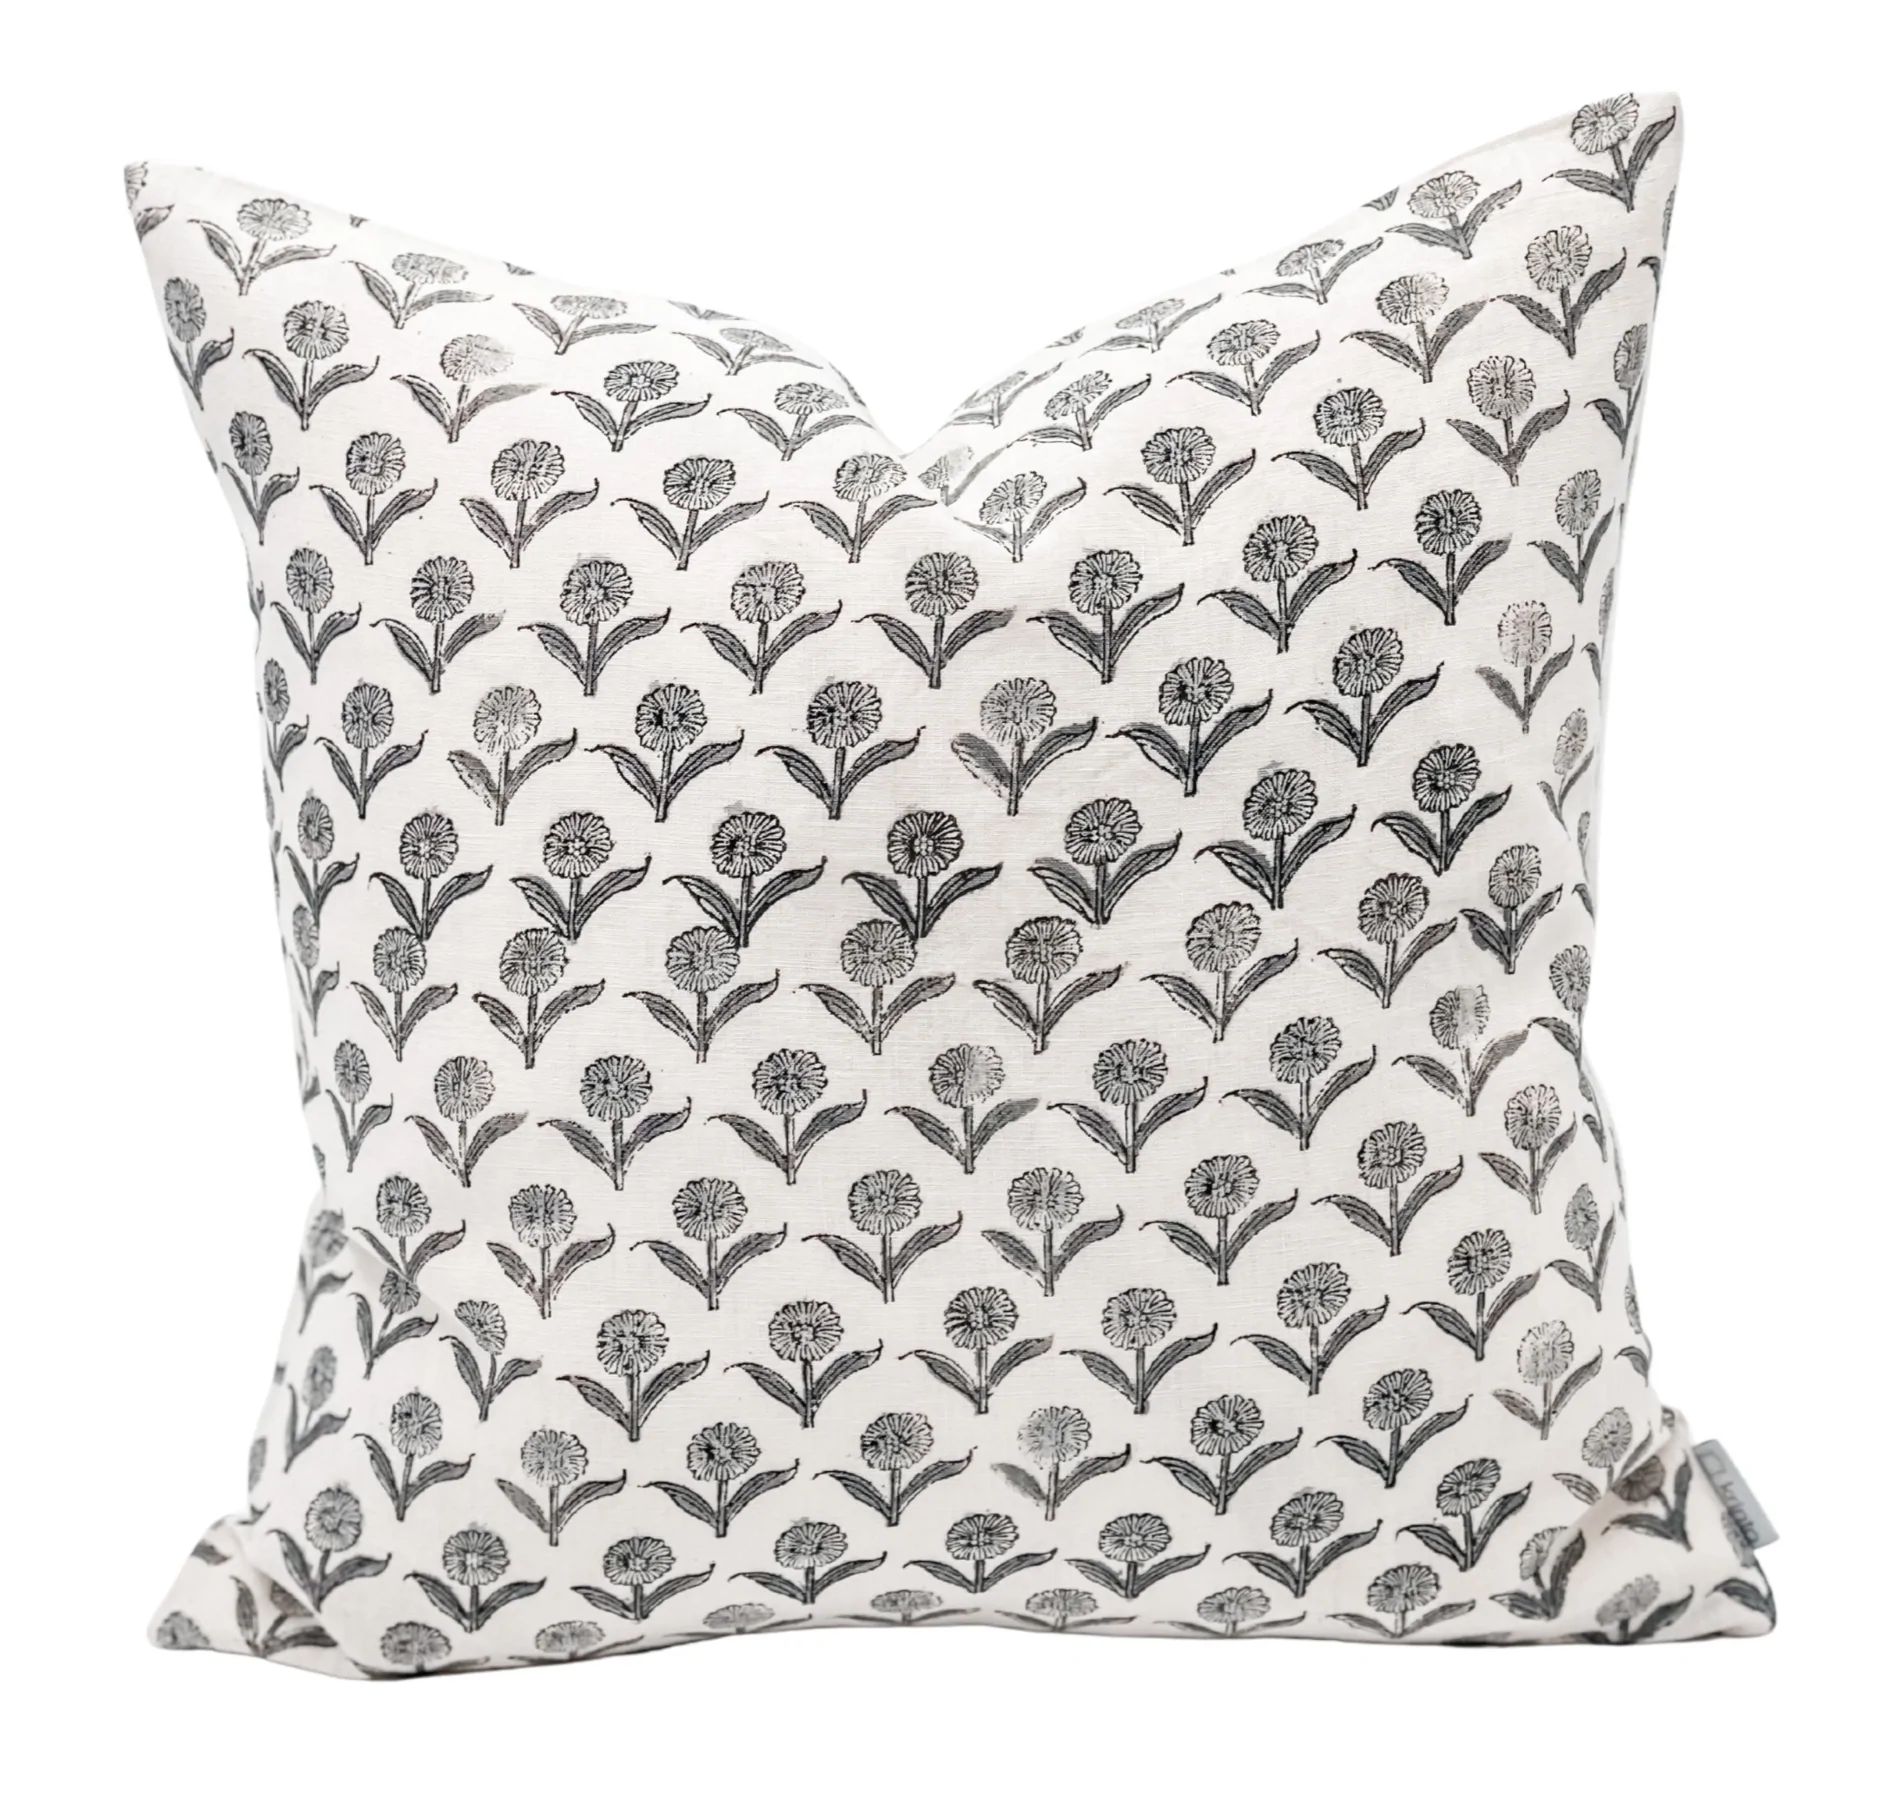 Tahoe in Rock Grey Pillow Cover | Krinto